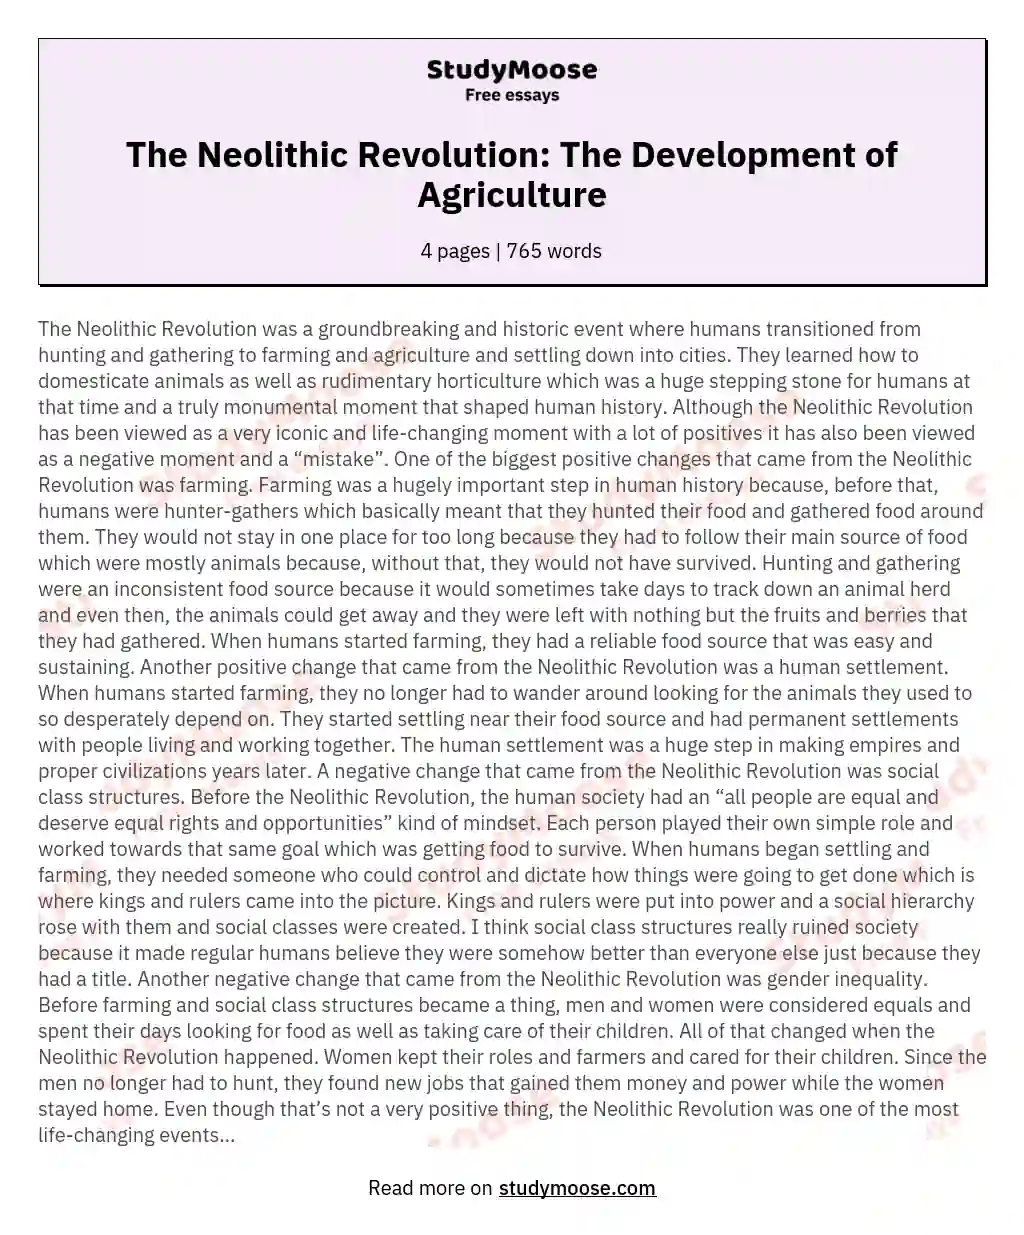 The Neolithic Revolution: The Development of Agriculture